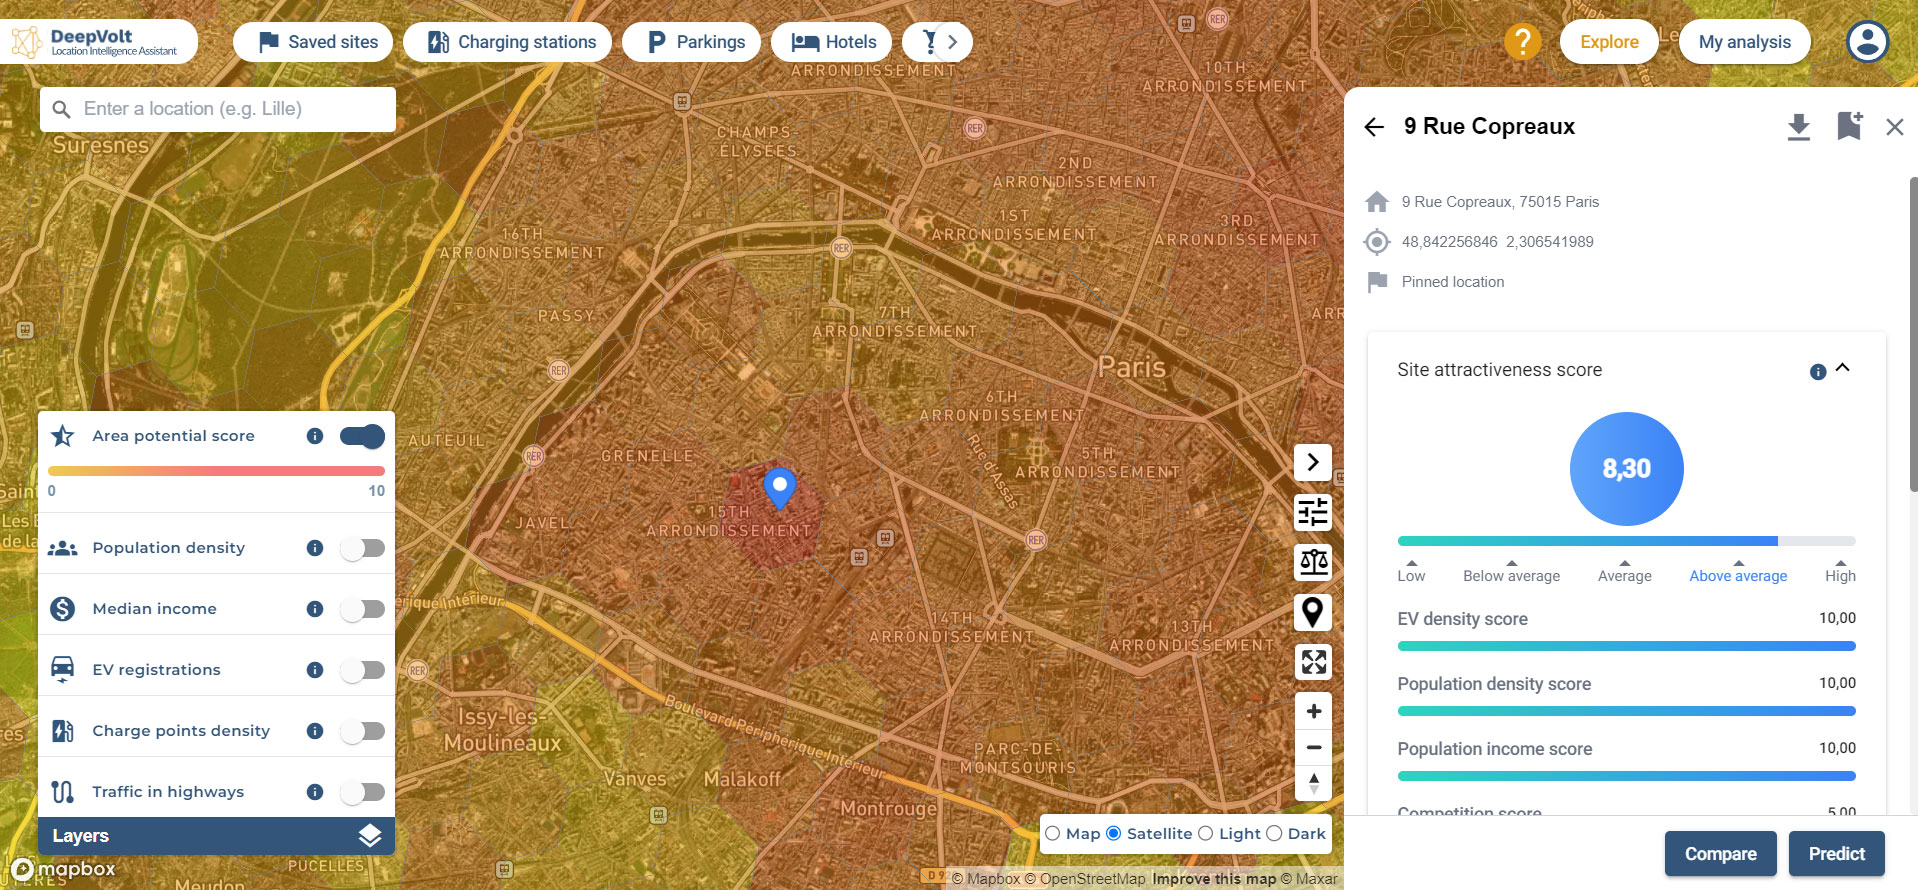 The image shows the user view of the DeepVolt Location Intelligence Assistant (DLIA) system. It shows a map of the city of Paris with neighbourhoods marked in the satellite view. A point in the centre is marked with a pin. You can also see various clickable information boxes and rating scales that tell you what facilities are available at that point and how attractive a charging station would be at that location.